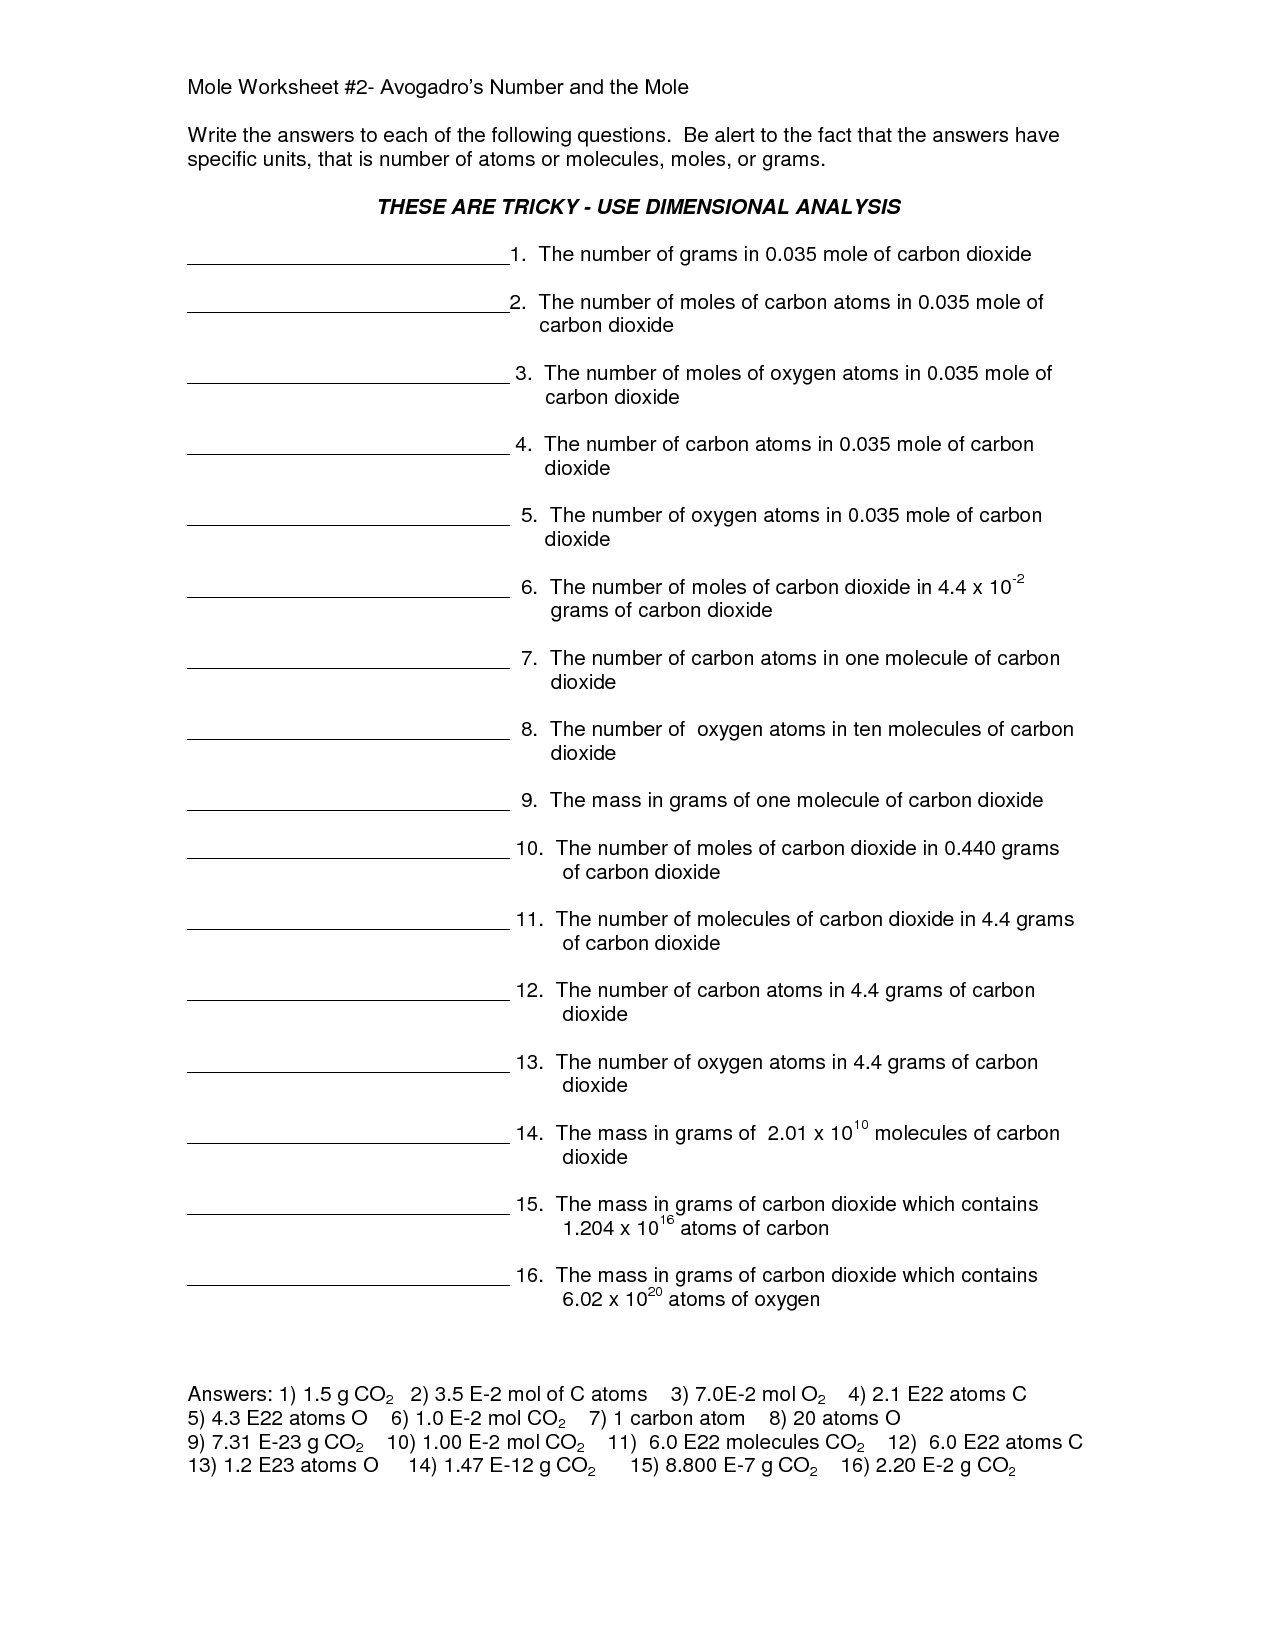 13-best-images-of-chemistry-mole-worksheet-mole-avogadro-number-worksheets-and-answers-mole